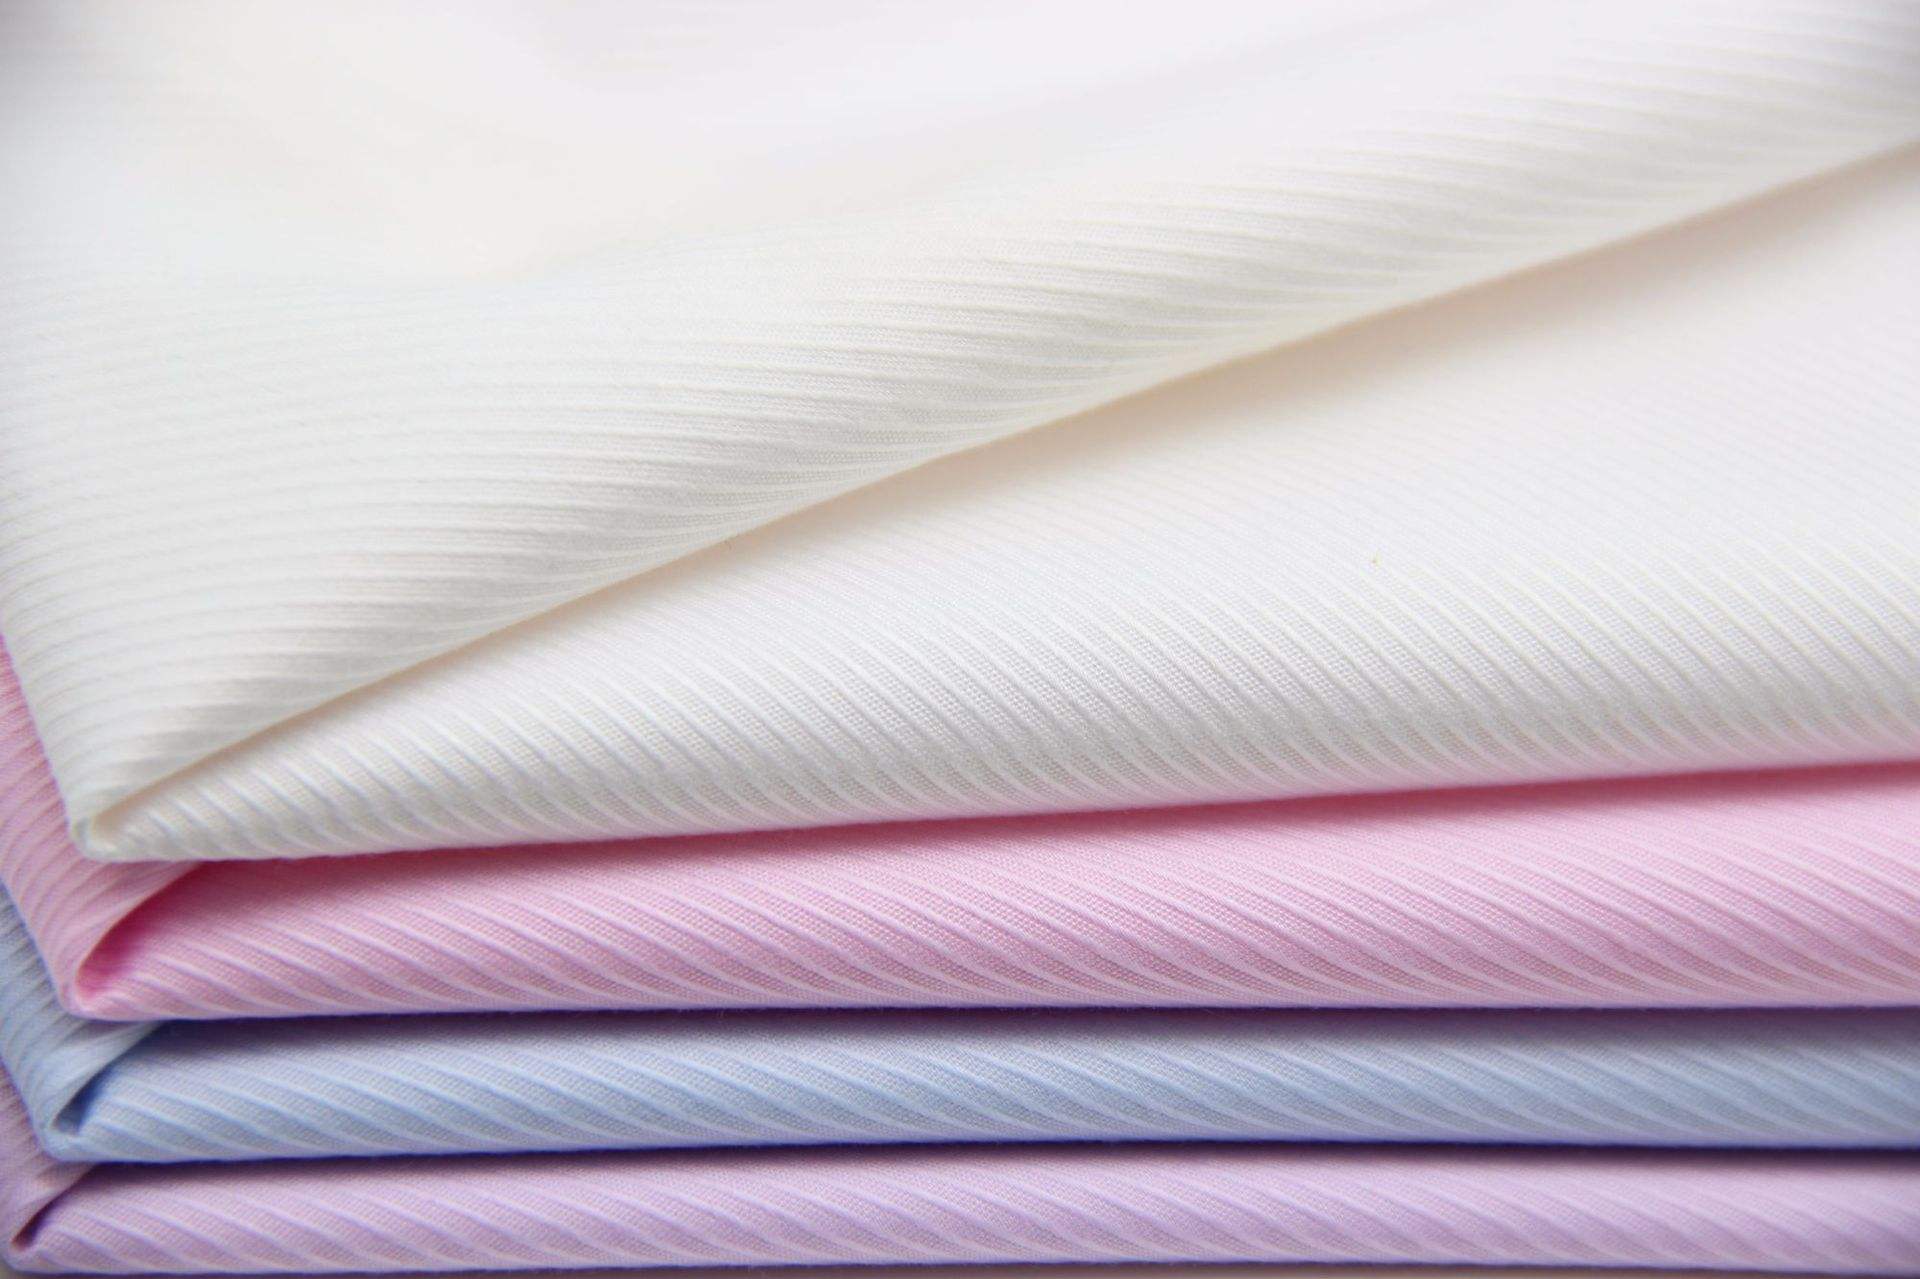 Do you know about polyester-cotton blended fabrics?